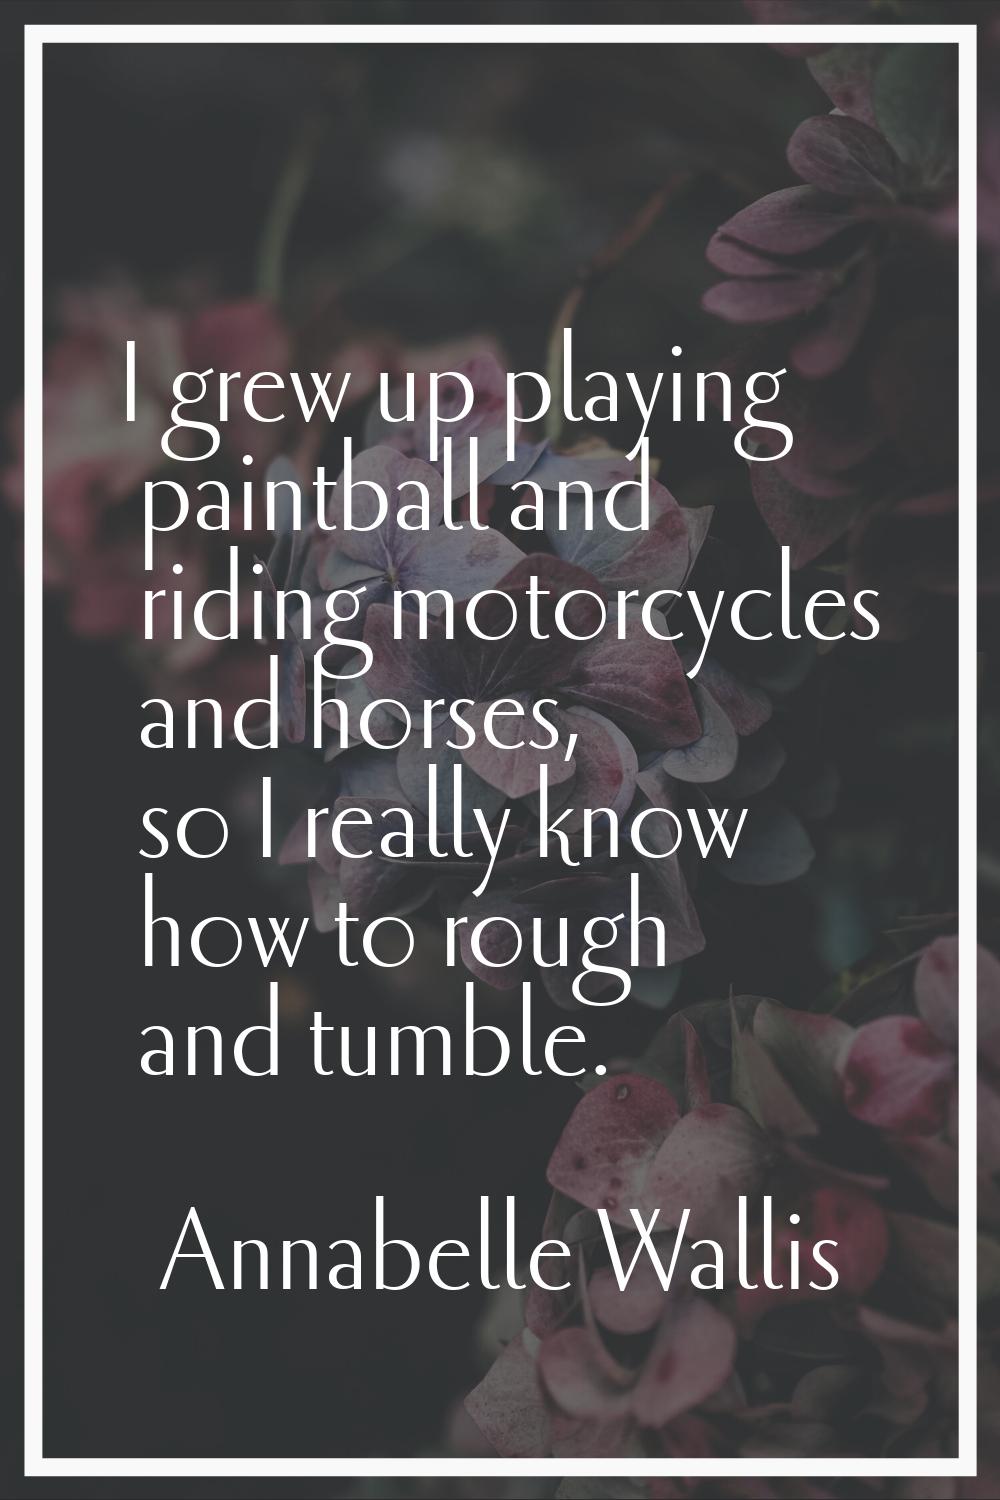 I grew up playing paintball and riding motorcycles and horses, so I really know how to rough and tu